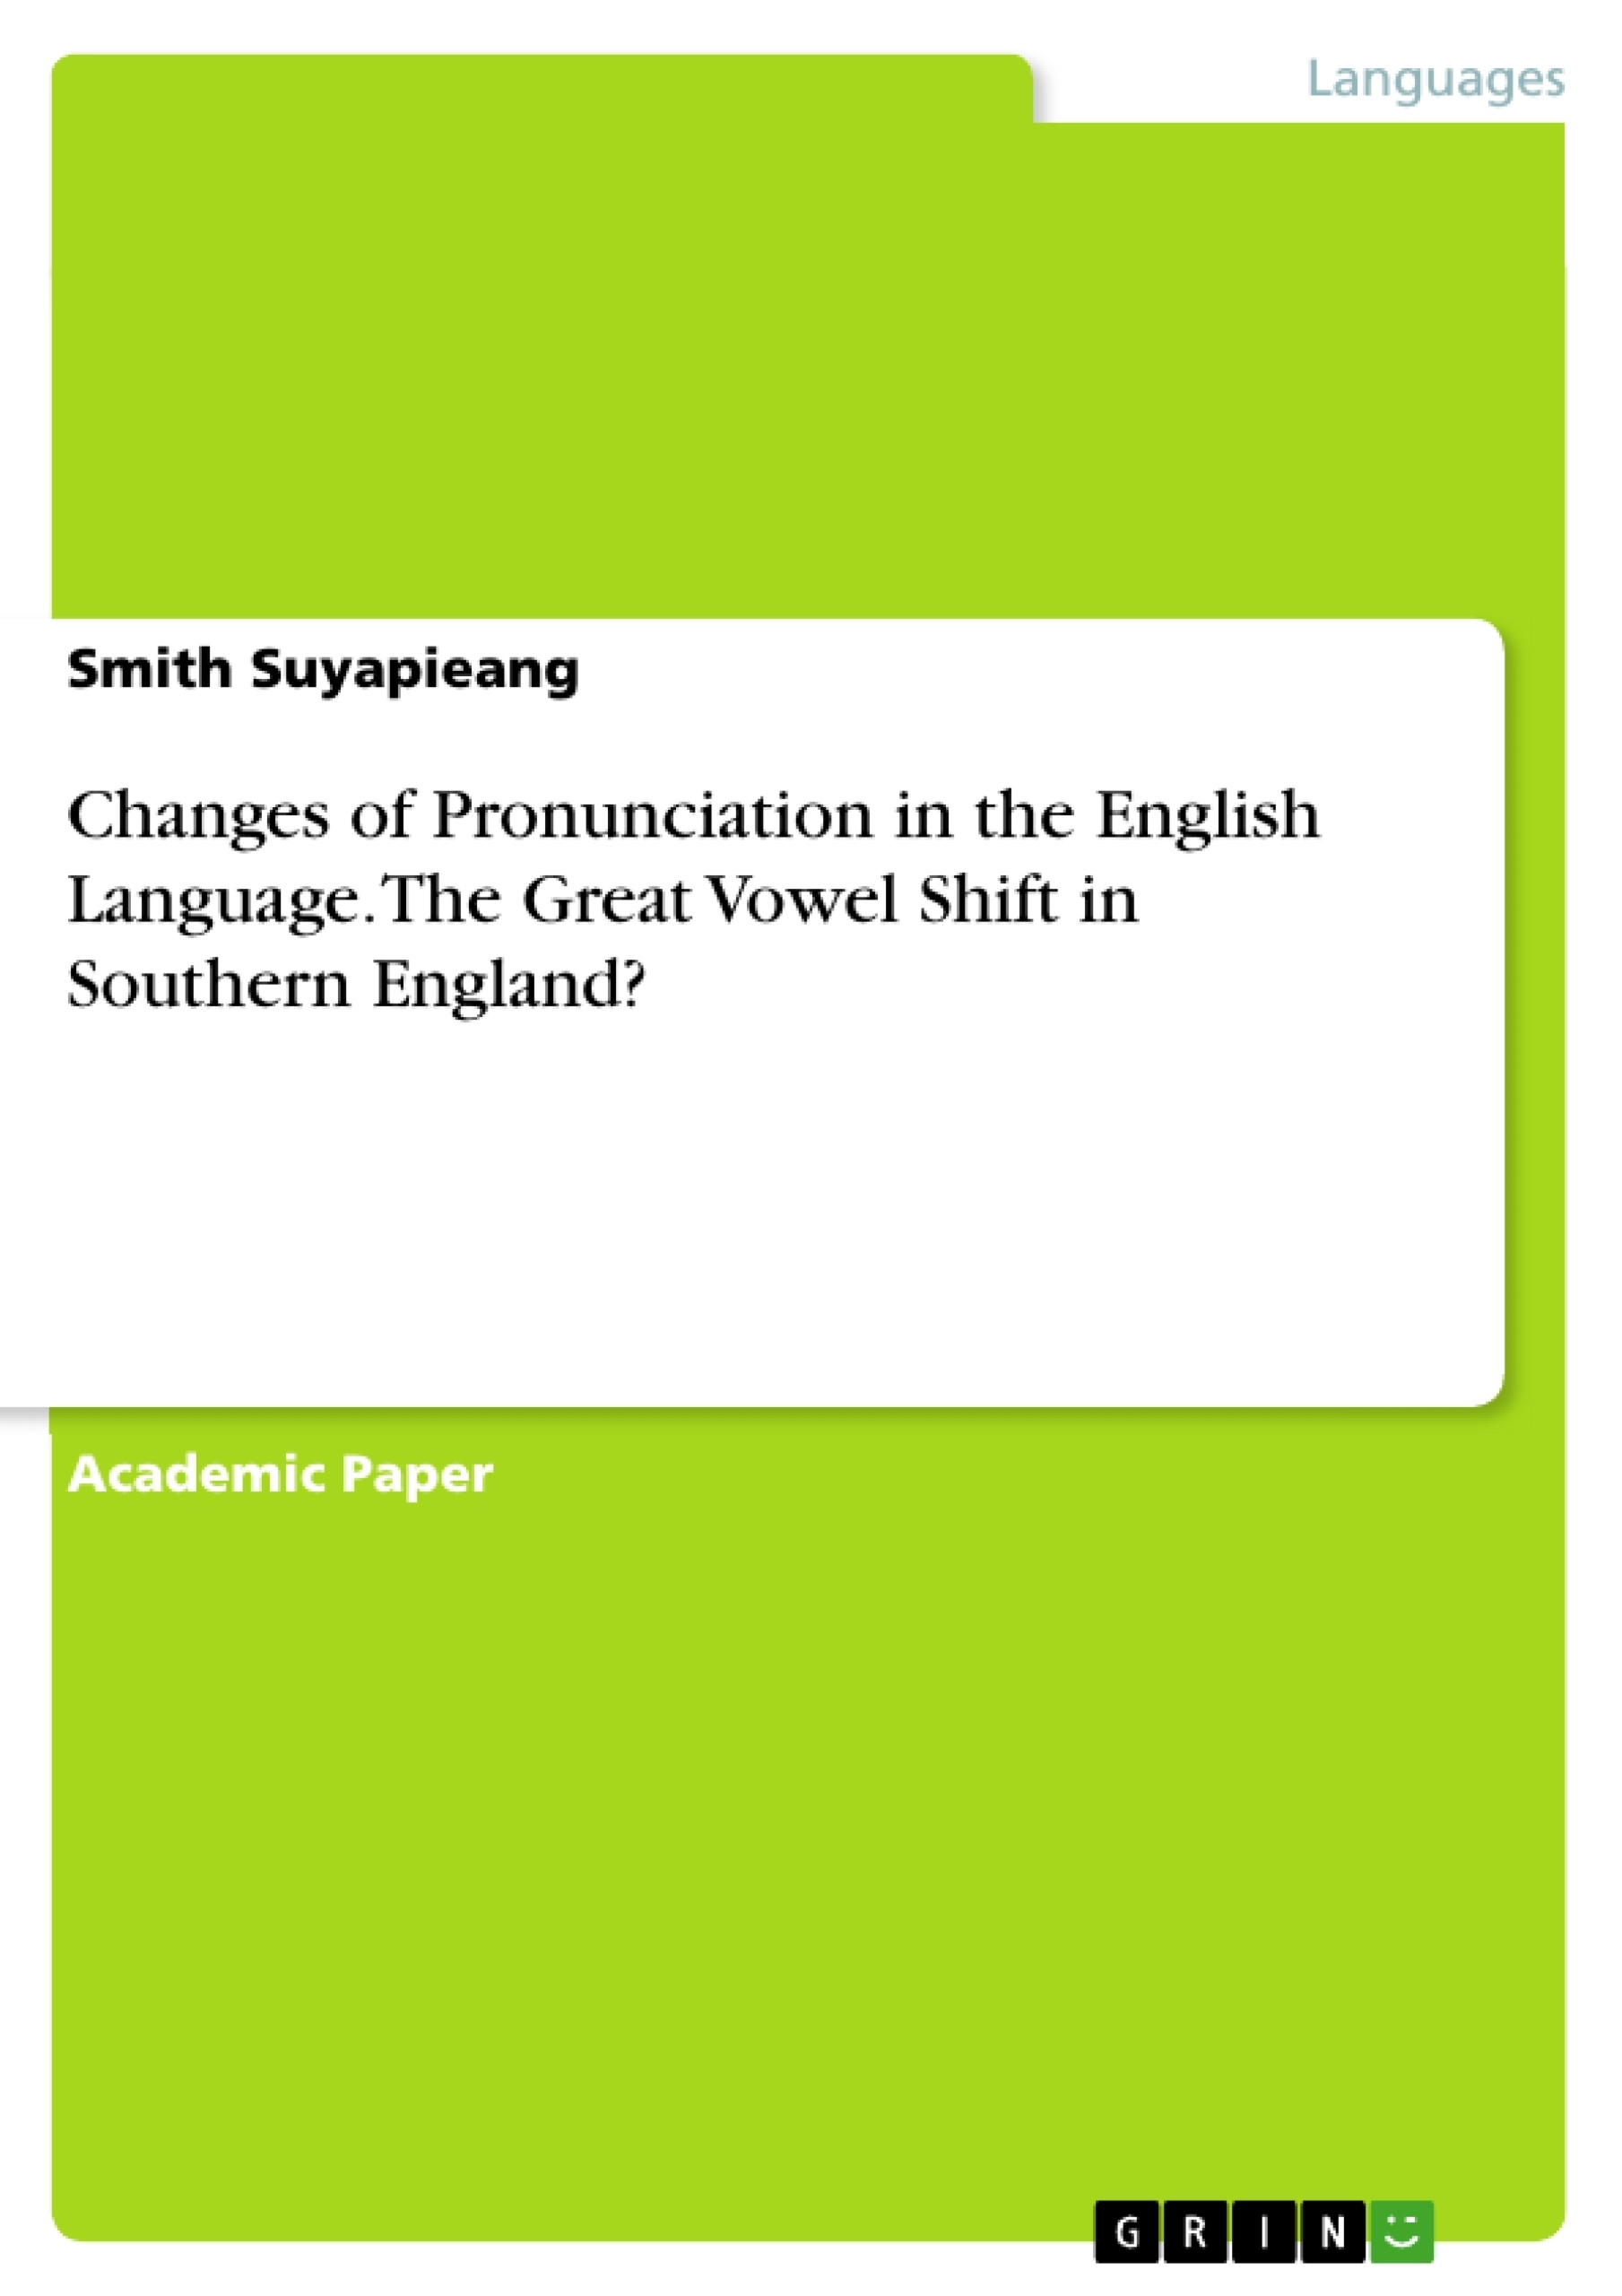 Title: Changes of Pronunciation in the English Language. The Great Vowel Shift in Southern England?